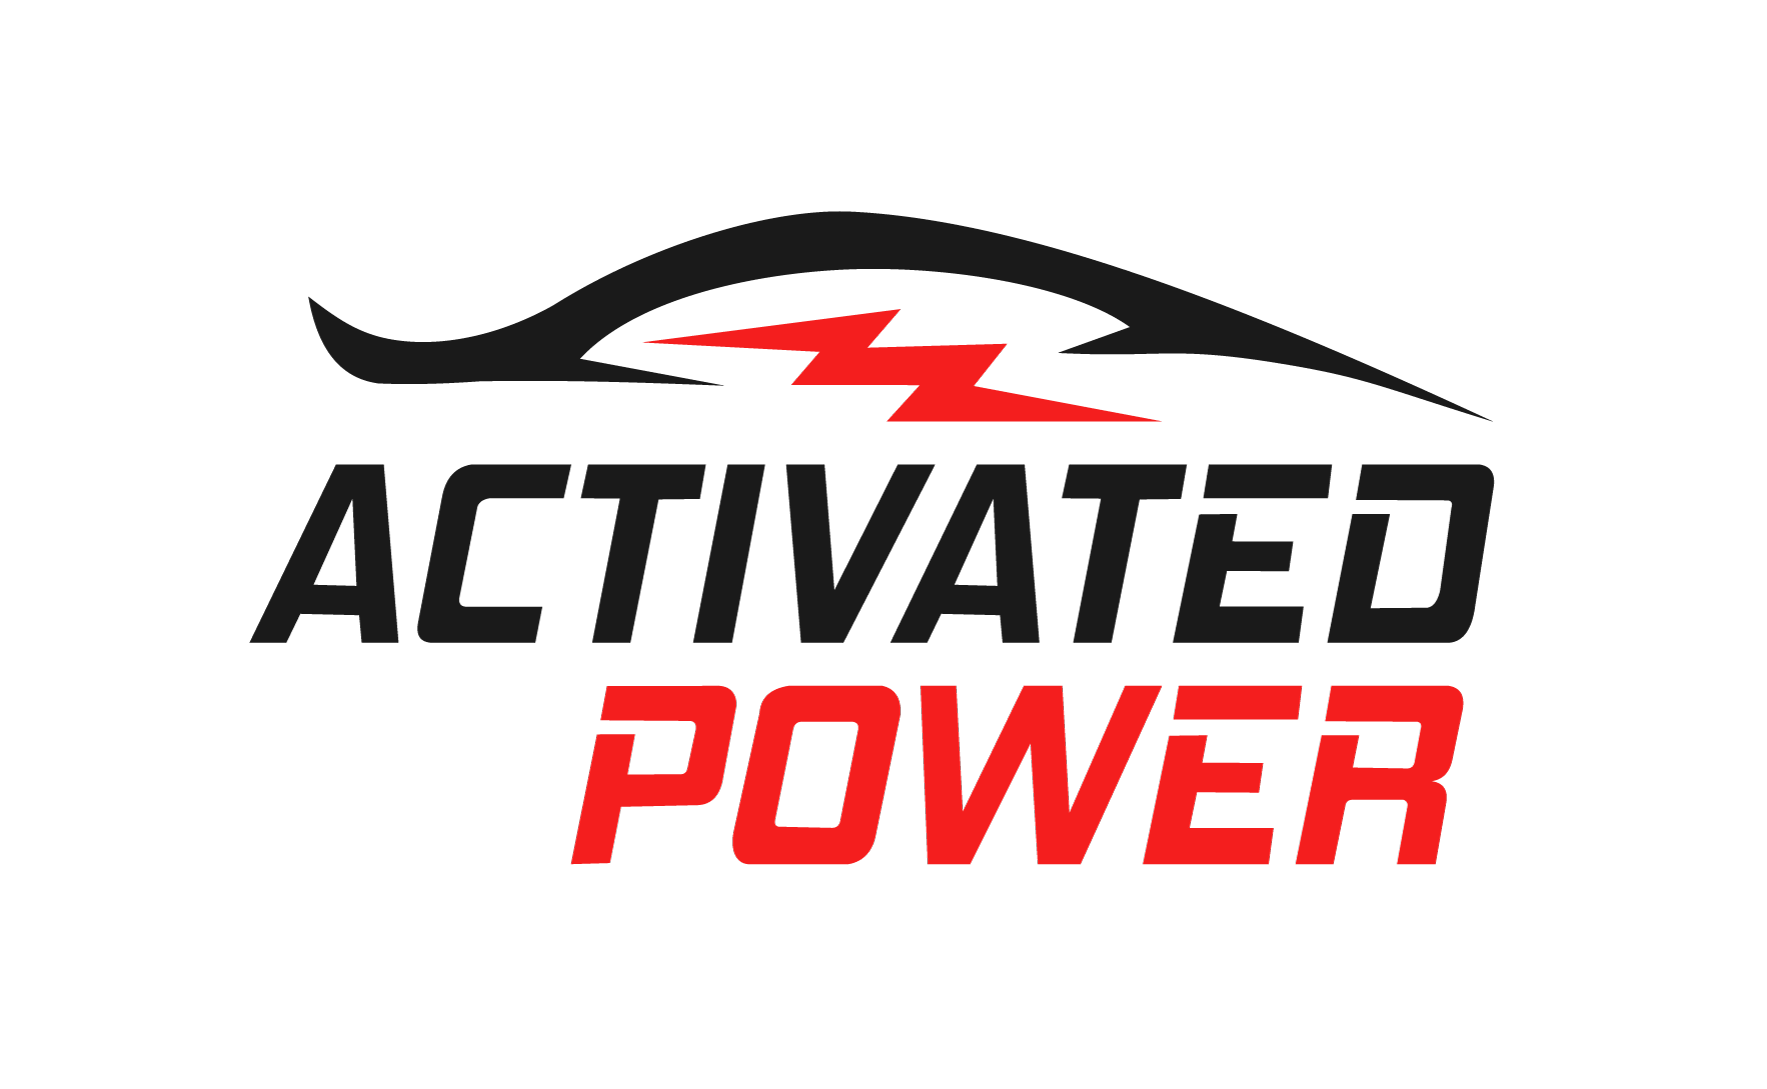 Activated Power